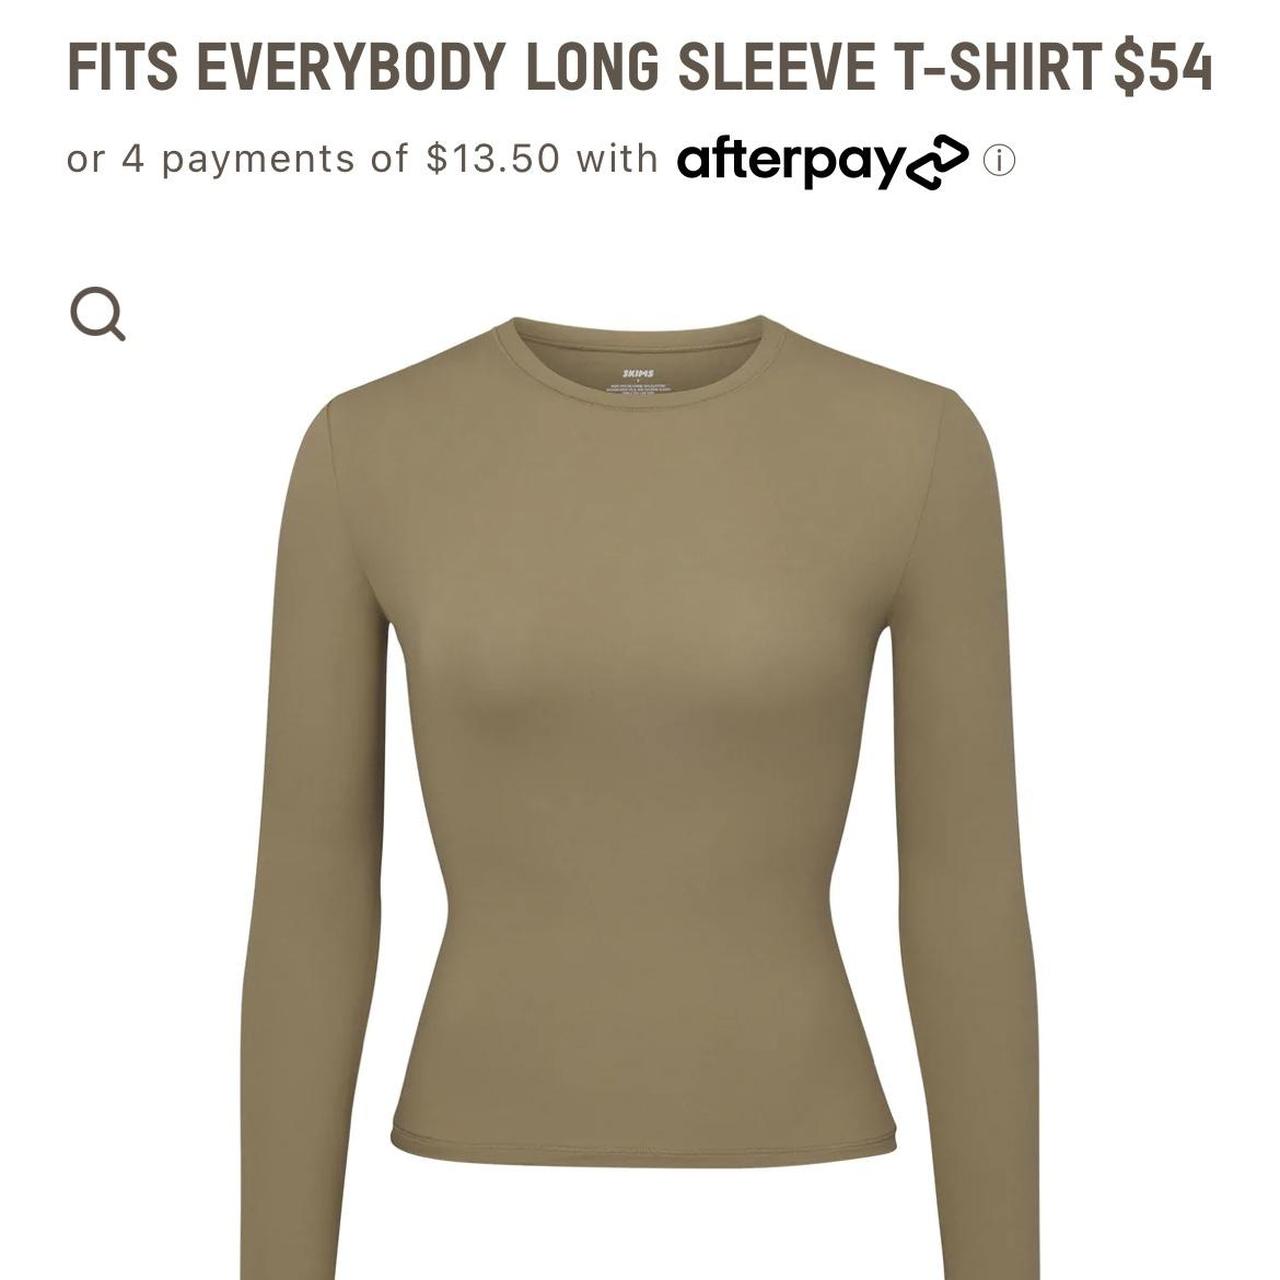 Fits everybody long sleeve t-shirt in the color - Depop